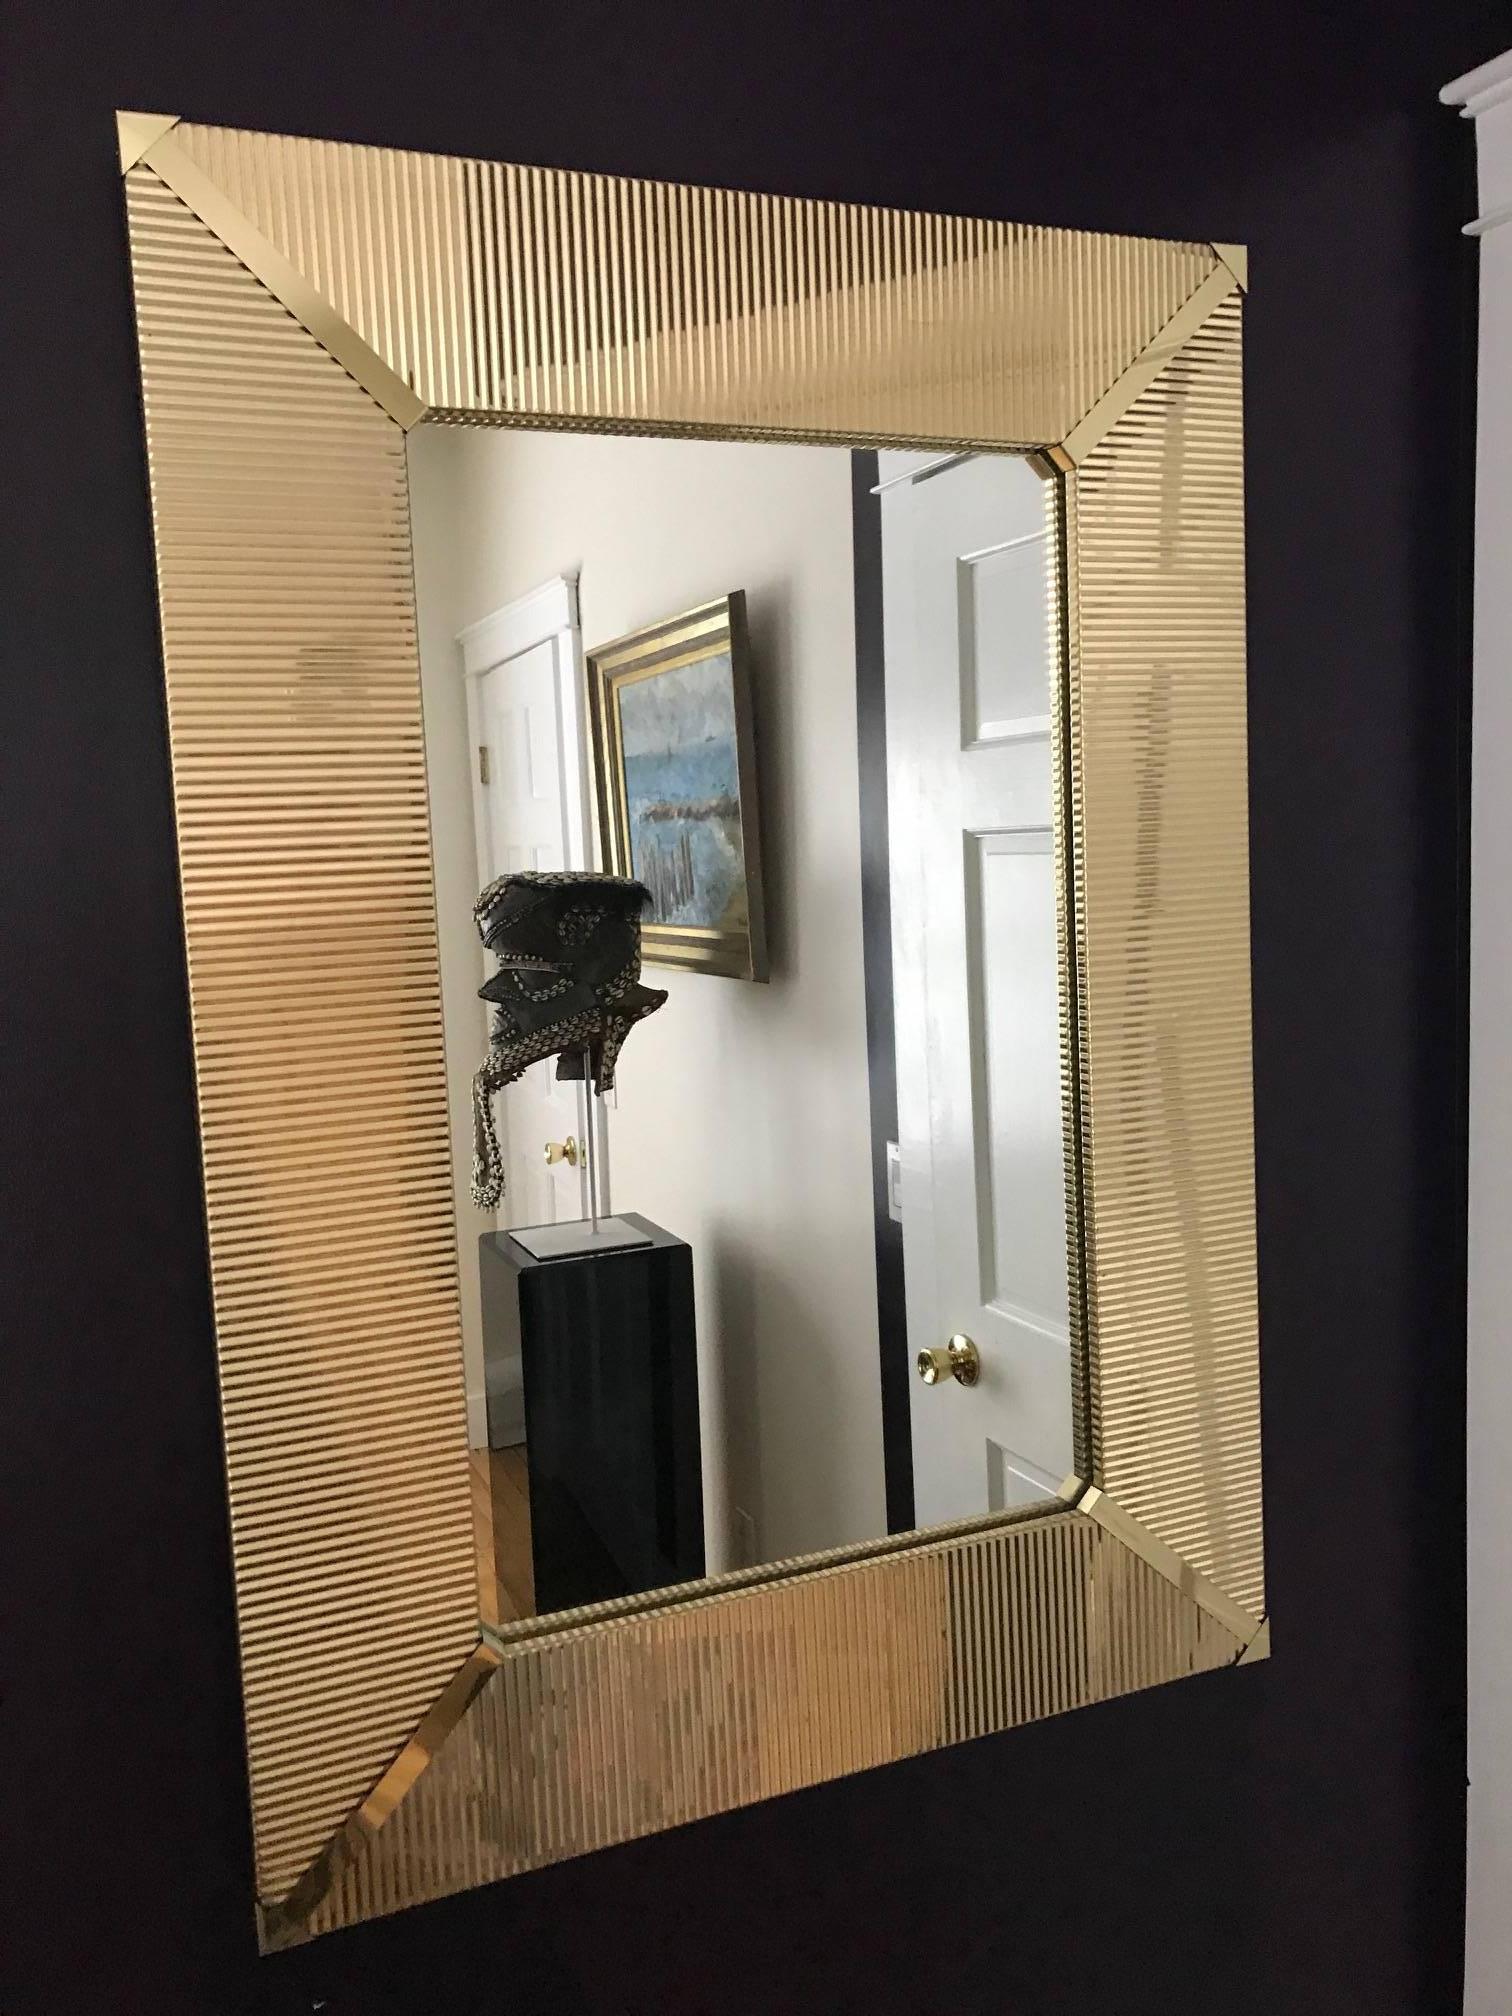 A very groovy and well-made wall mirror made of wood and brass circa 1970s. The brass frame features a corrugated design with corner trim pieces. Oversized and heavy and will make a bespoken piece in any room.